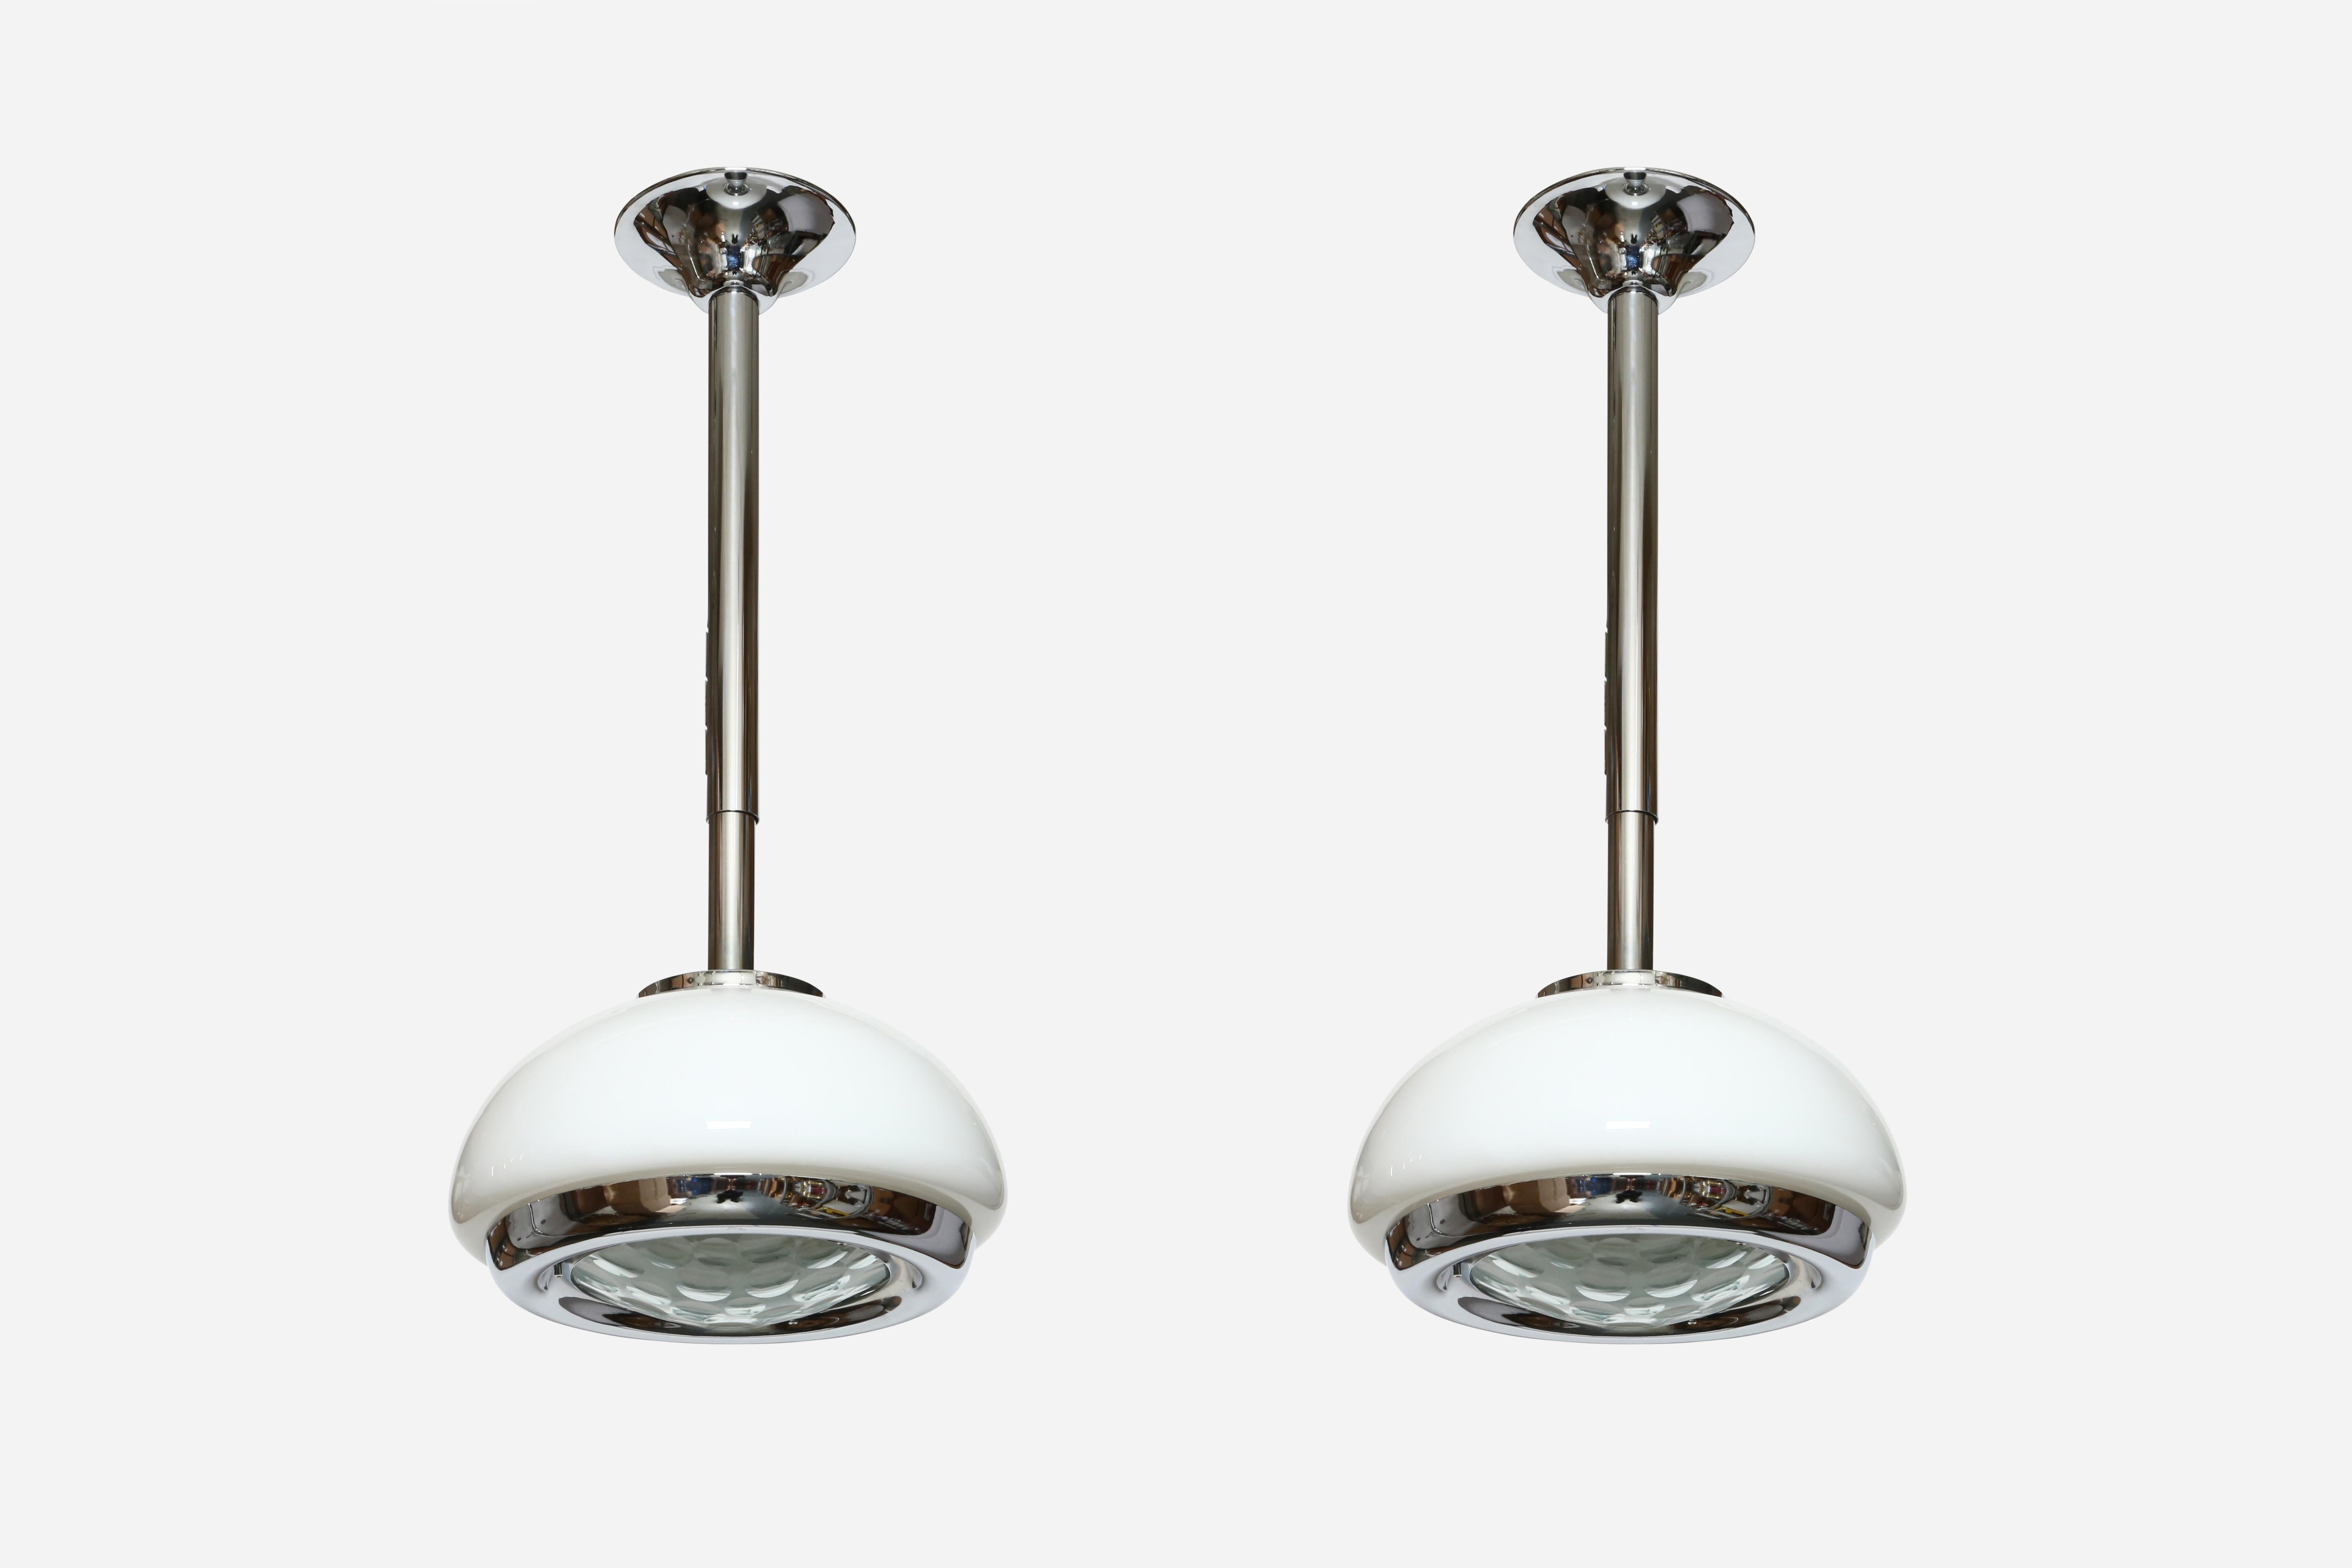 Pia Guidetti Crippa for Lumi ceiling pendants.
Made in Italy, 1960s
Opaline glass shade, faceted glass diffuser, chrome plated metal.
Height adjustable from 38 inches to 44 inches in incremental steps.
Complimentary US rewiring upon request.
Take 5